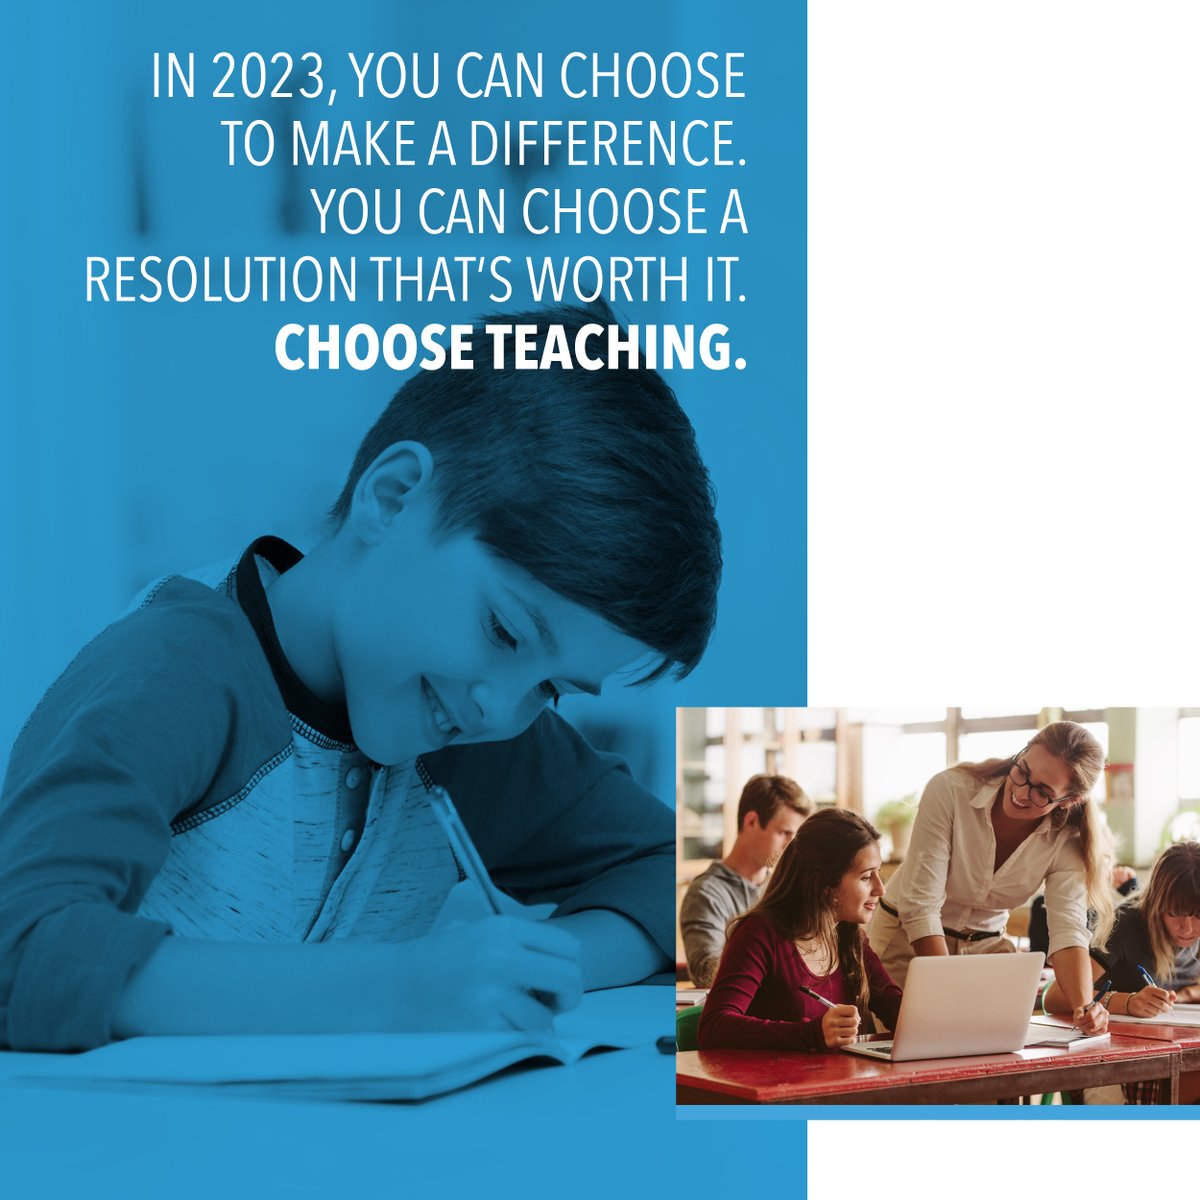 Kick off the New Year with a new CAREER. There is no better time to make your New Year’s resolution count. Choose teaching today. 📚 Learn more here: bit.ly/3QidVQY
.
#TeachersofTomorrow #ChooseWorkThatsWorthIt #ChooseTeaching